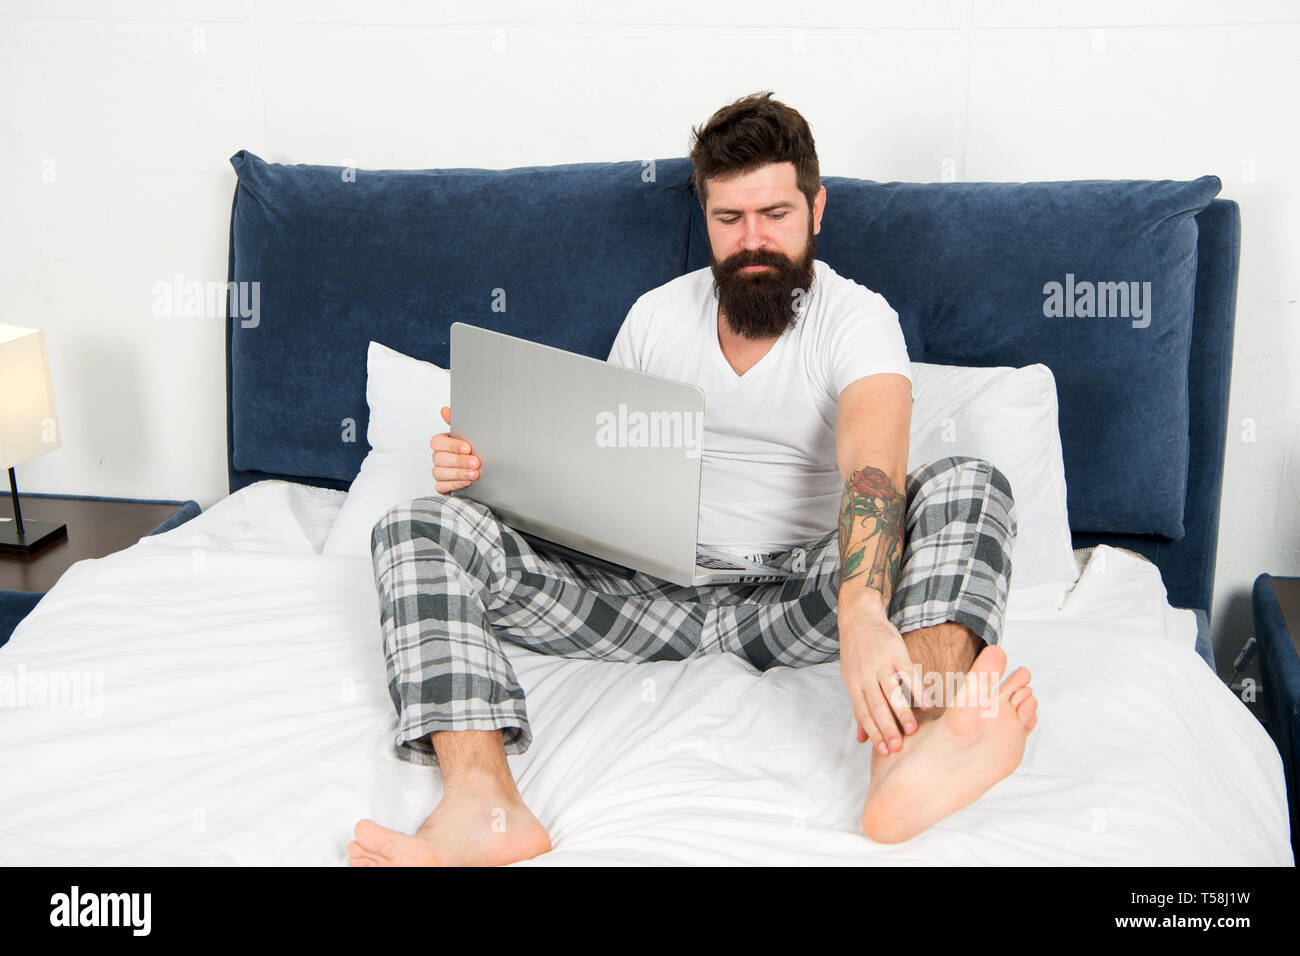 Man surfing internet or working online. Hipster bearded guy pajamas freelance worker. Remote work concept. Online life. Social networks internet addiction. Online shopping. Whole world in his laptop. Stock Photo